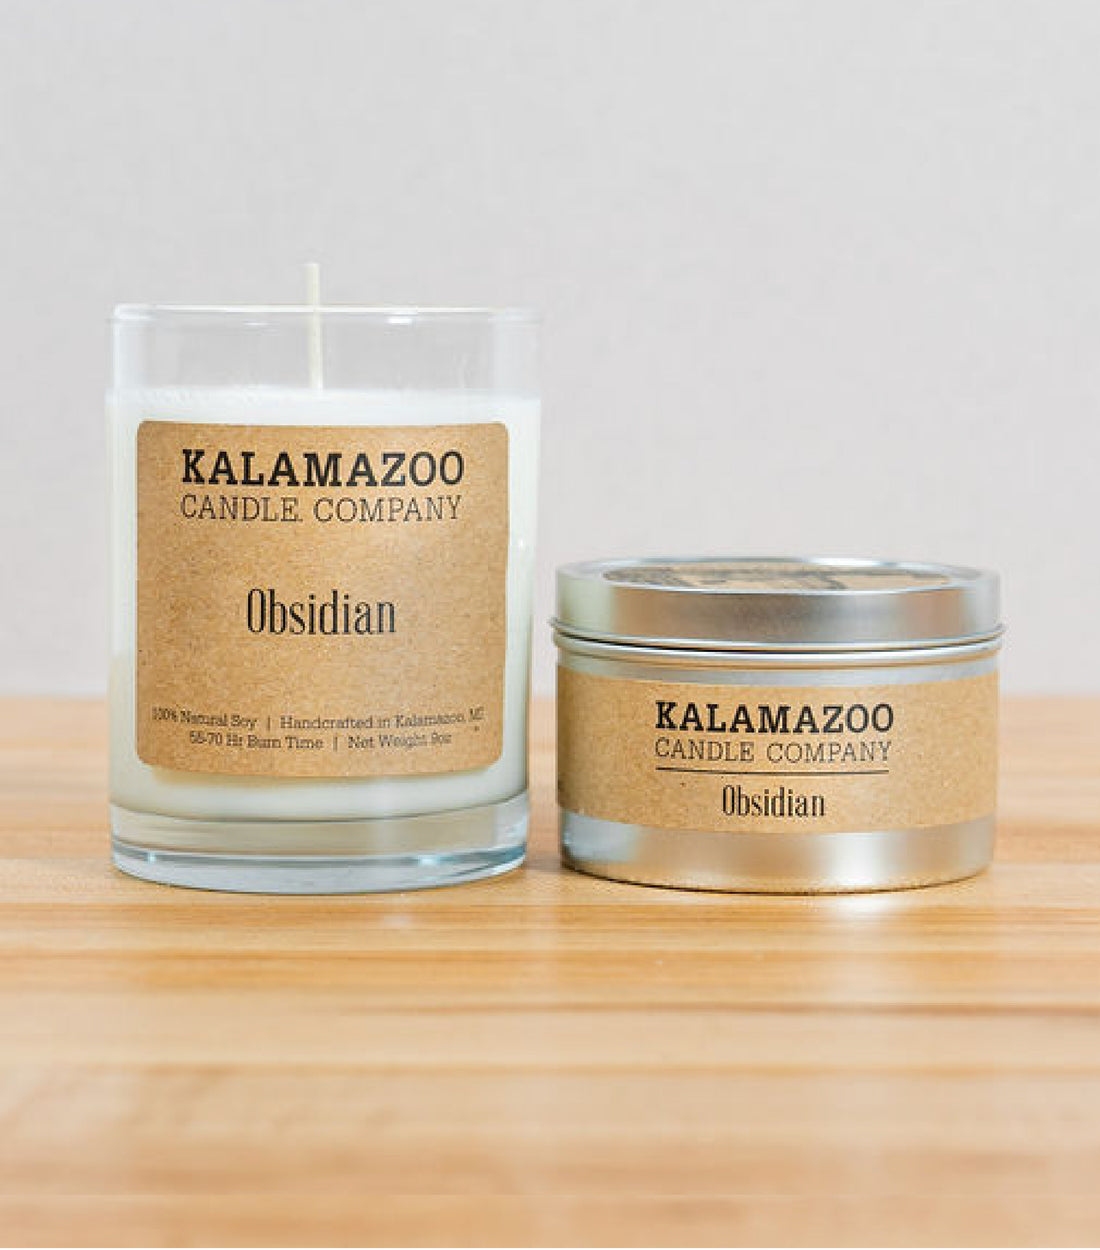 Obsidian Candles Warm island breezes bursting with sugared oranges, lemons, limes and exotic mountain greens, this classic soy candle smells like ripe citrus in a shaded oasis. All Kalamazoo Candles are: 100% natural scented soy wax; produced using locally sourced products.